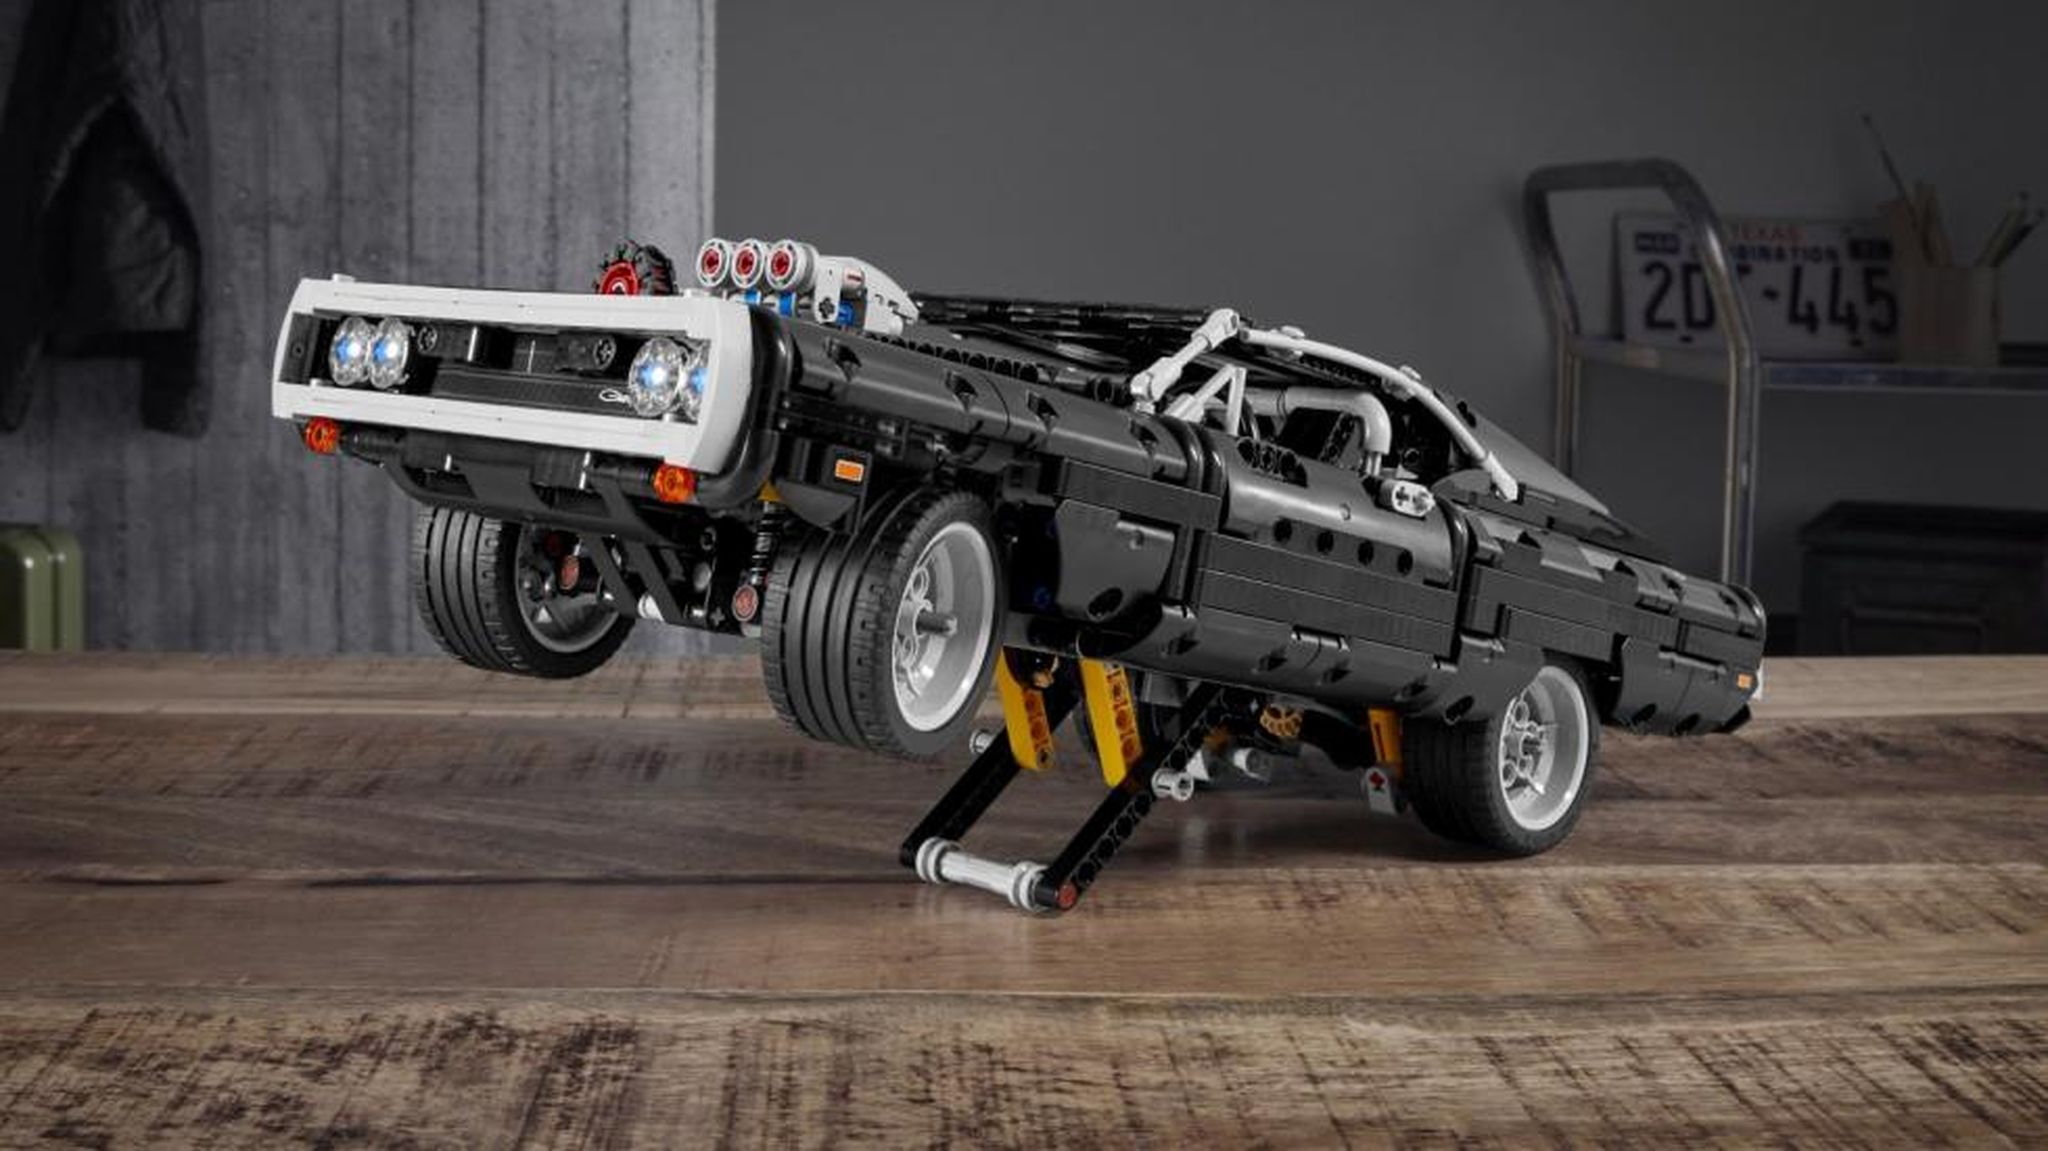 Galería: Dodge Charger Lego Fast & Furious